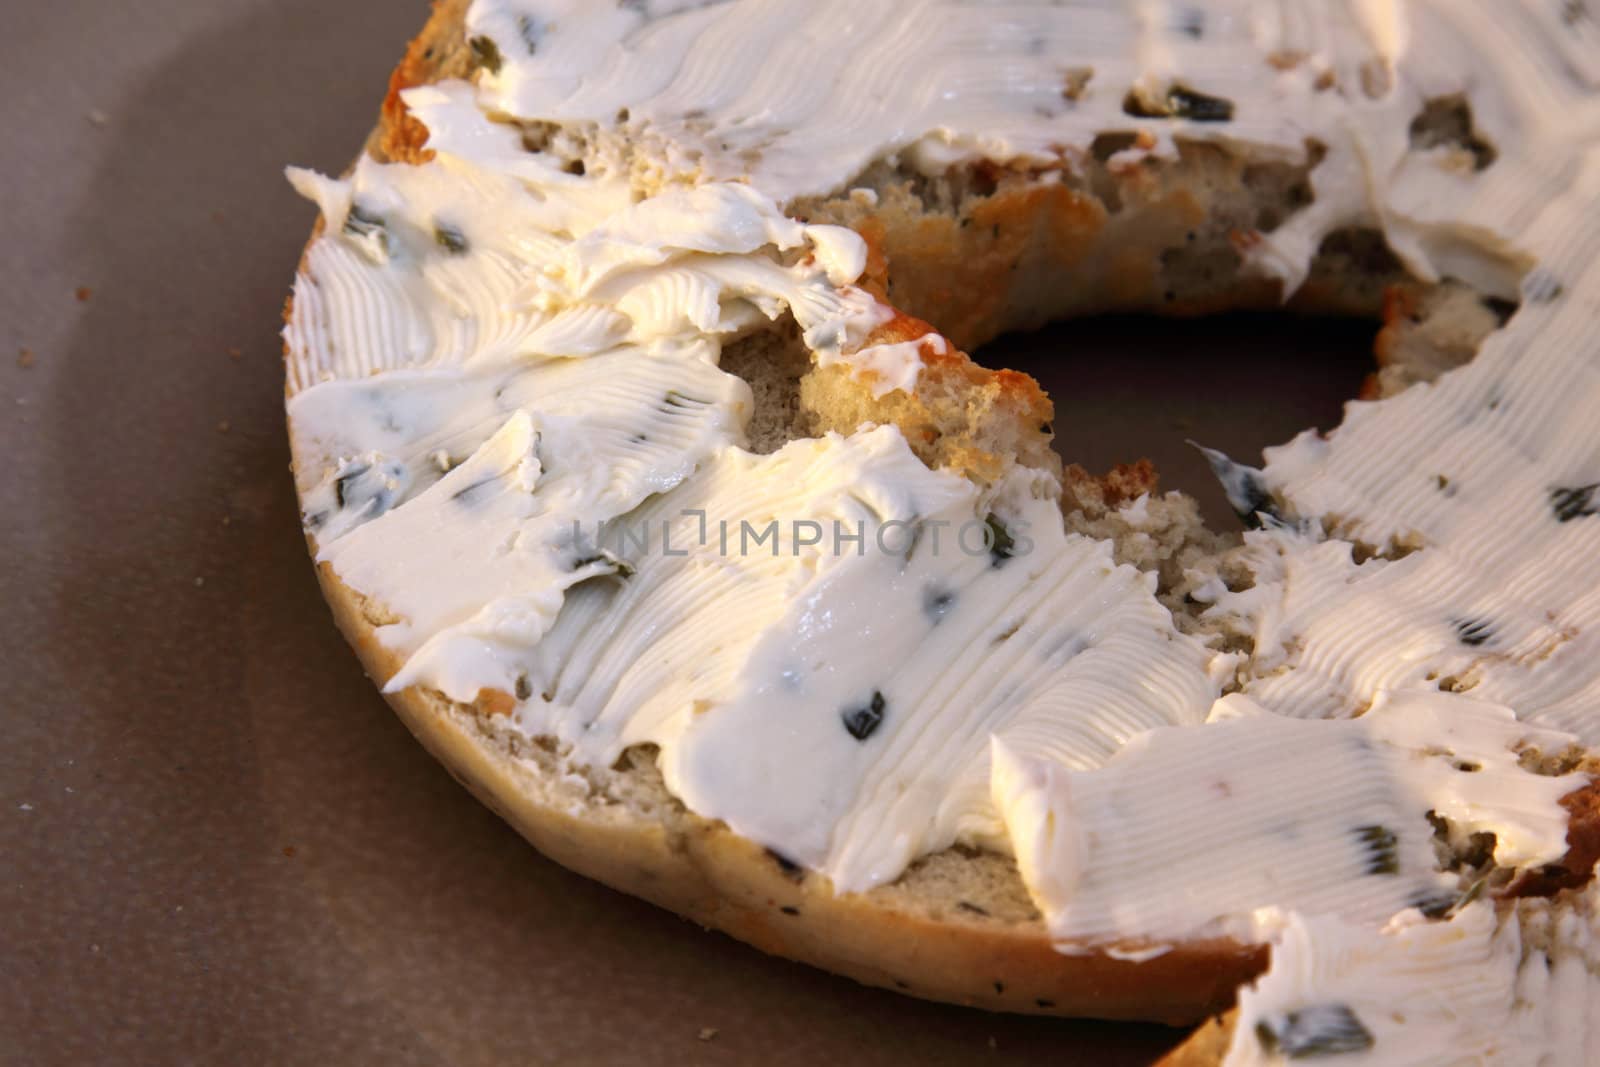 A toasted bagel with cream cheese with herbs.